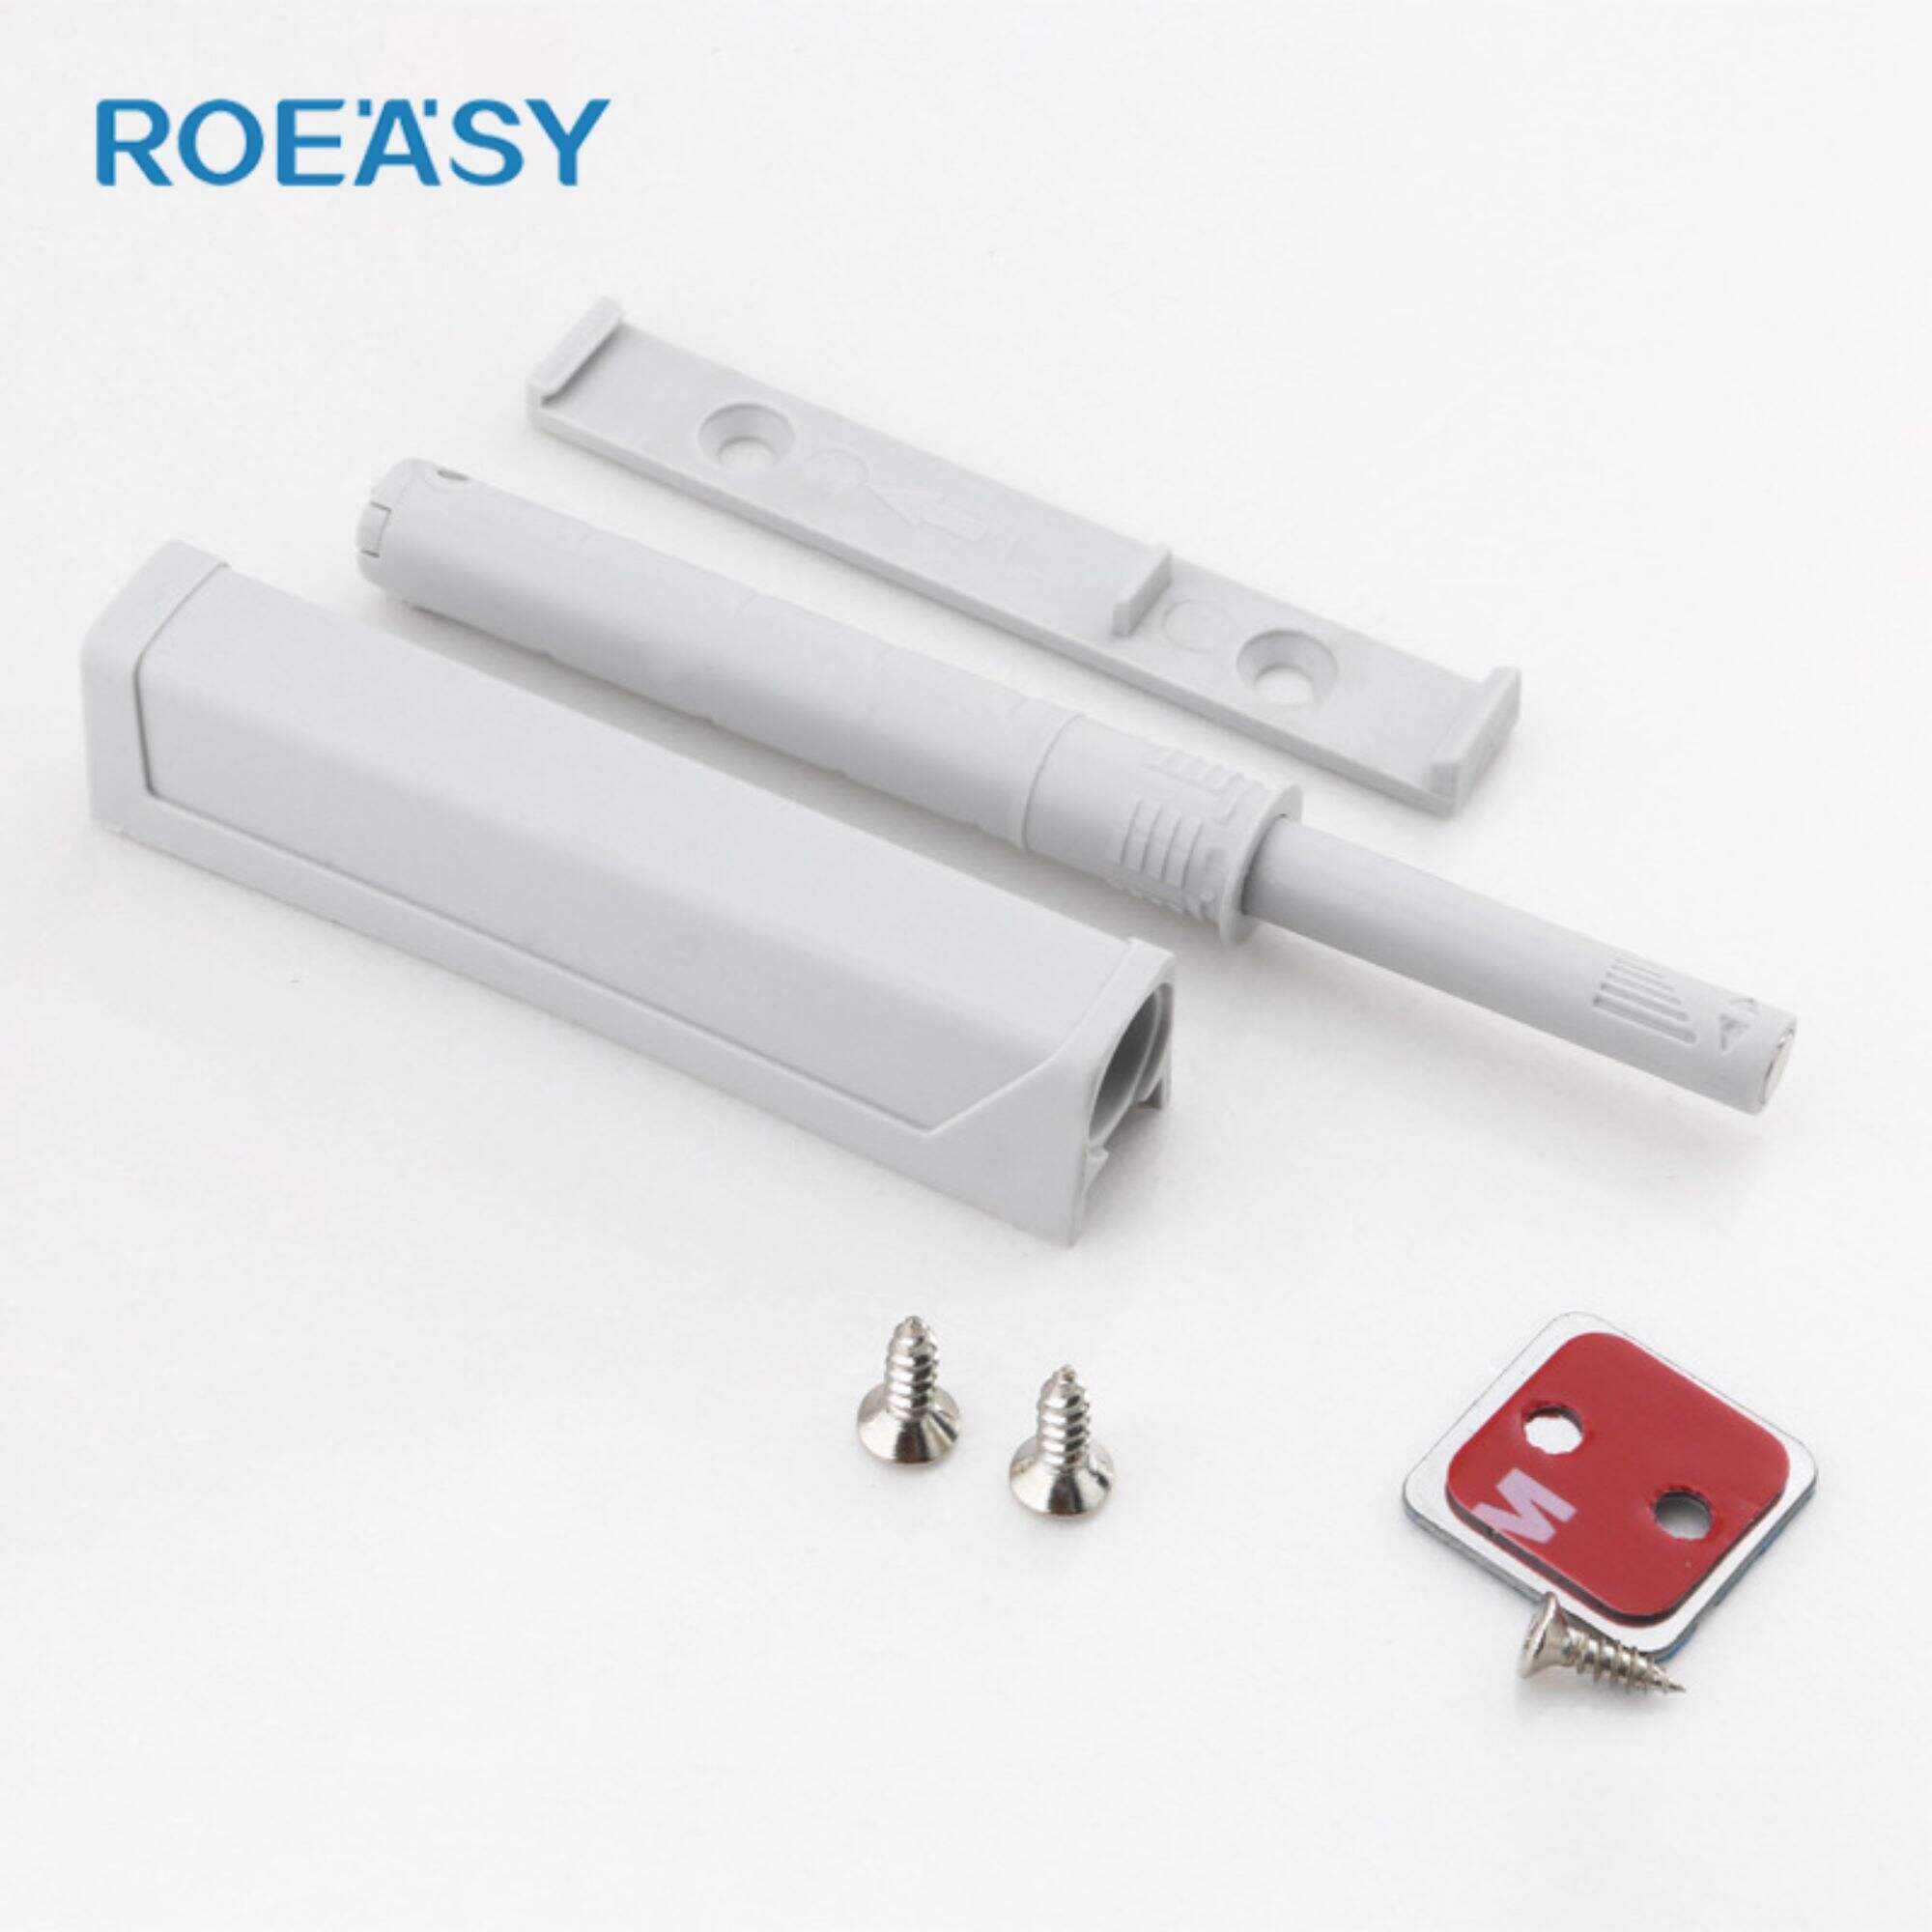 Roeasy RT021A Magnetic Catcher Push to Open Cabinet Door Latches